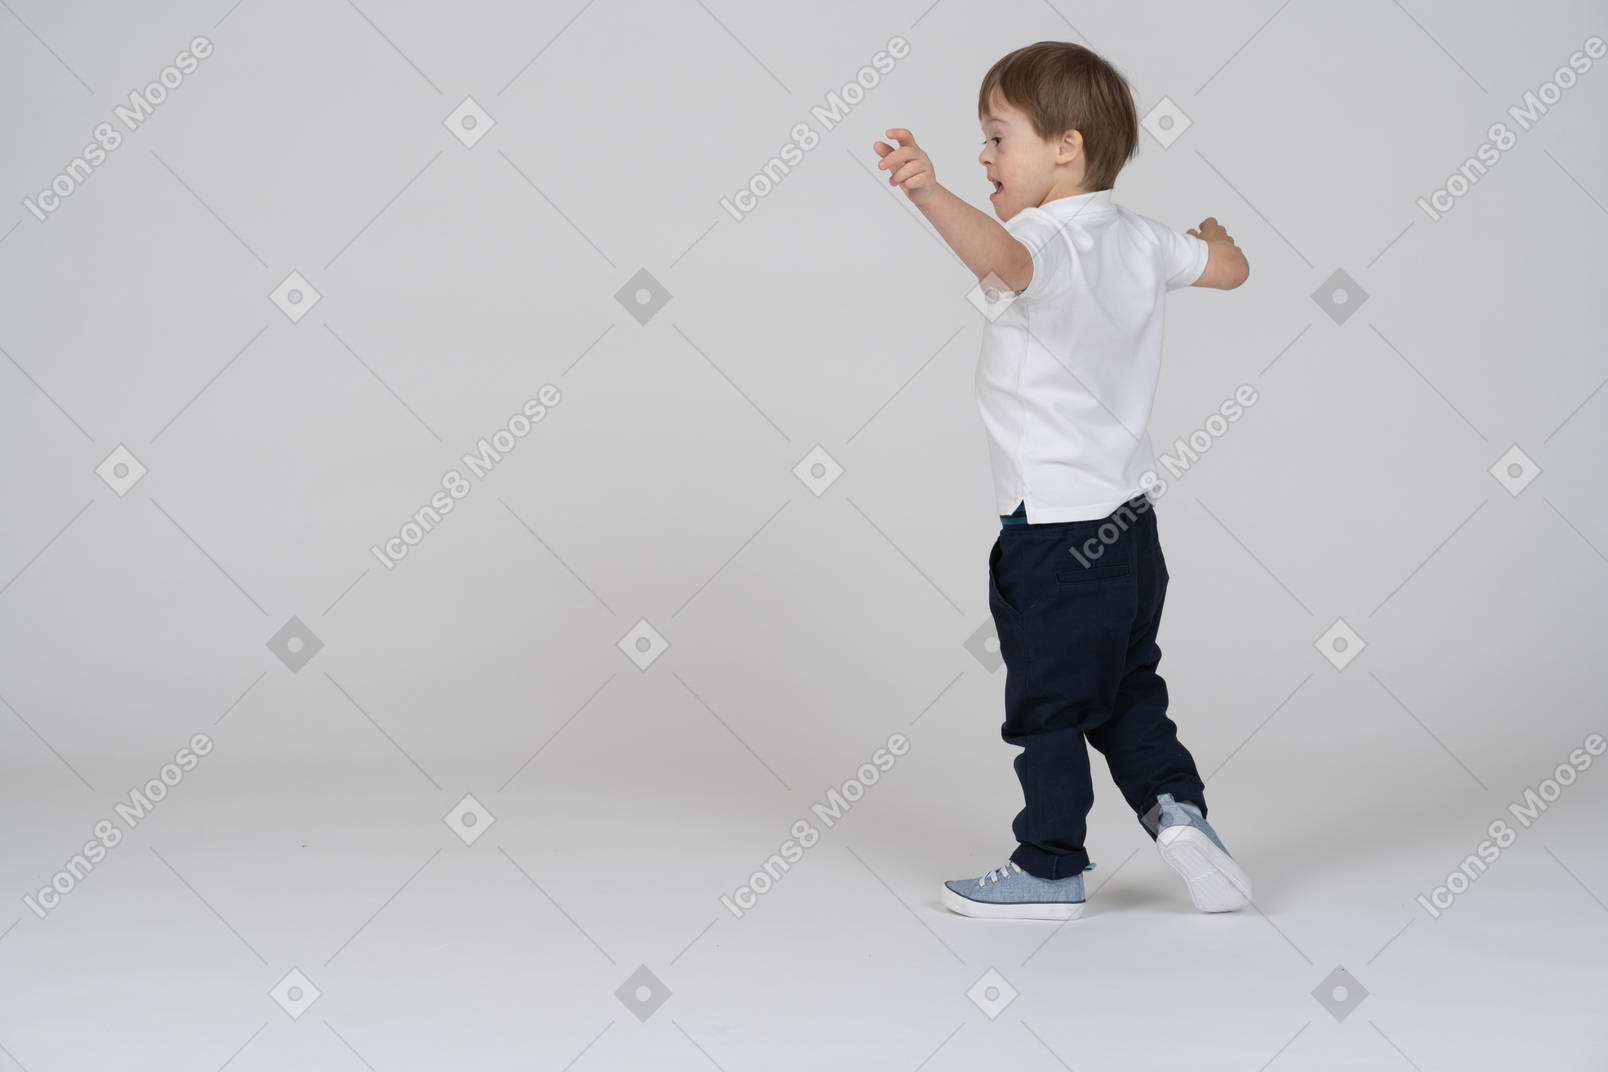 Side view of a little boy moving around